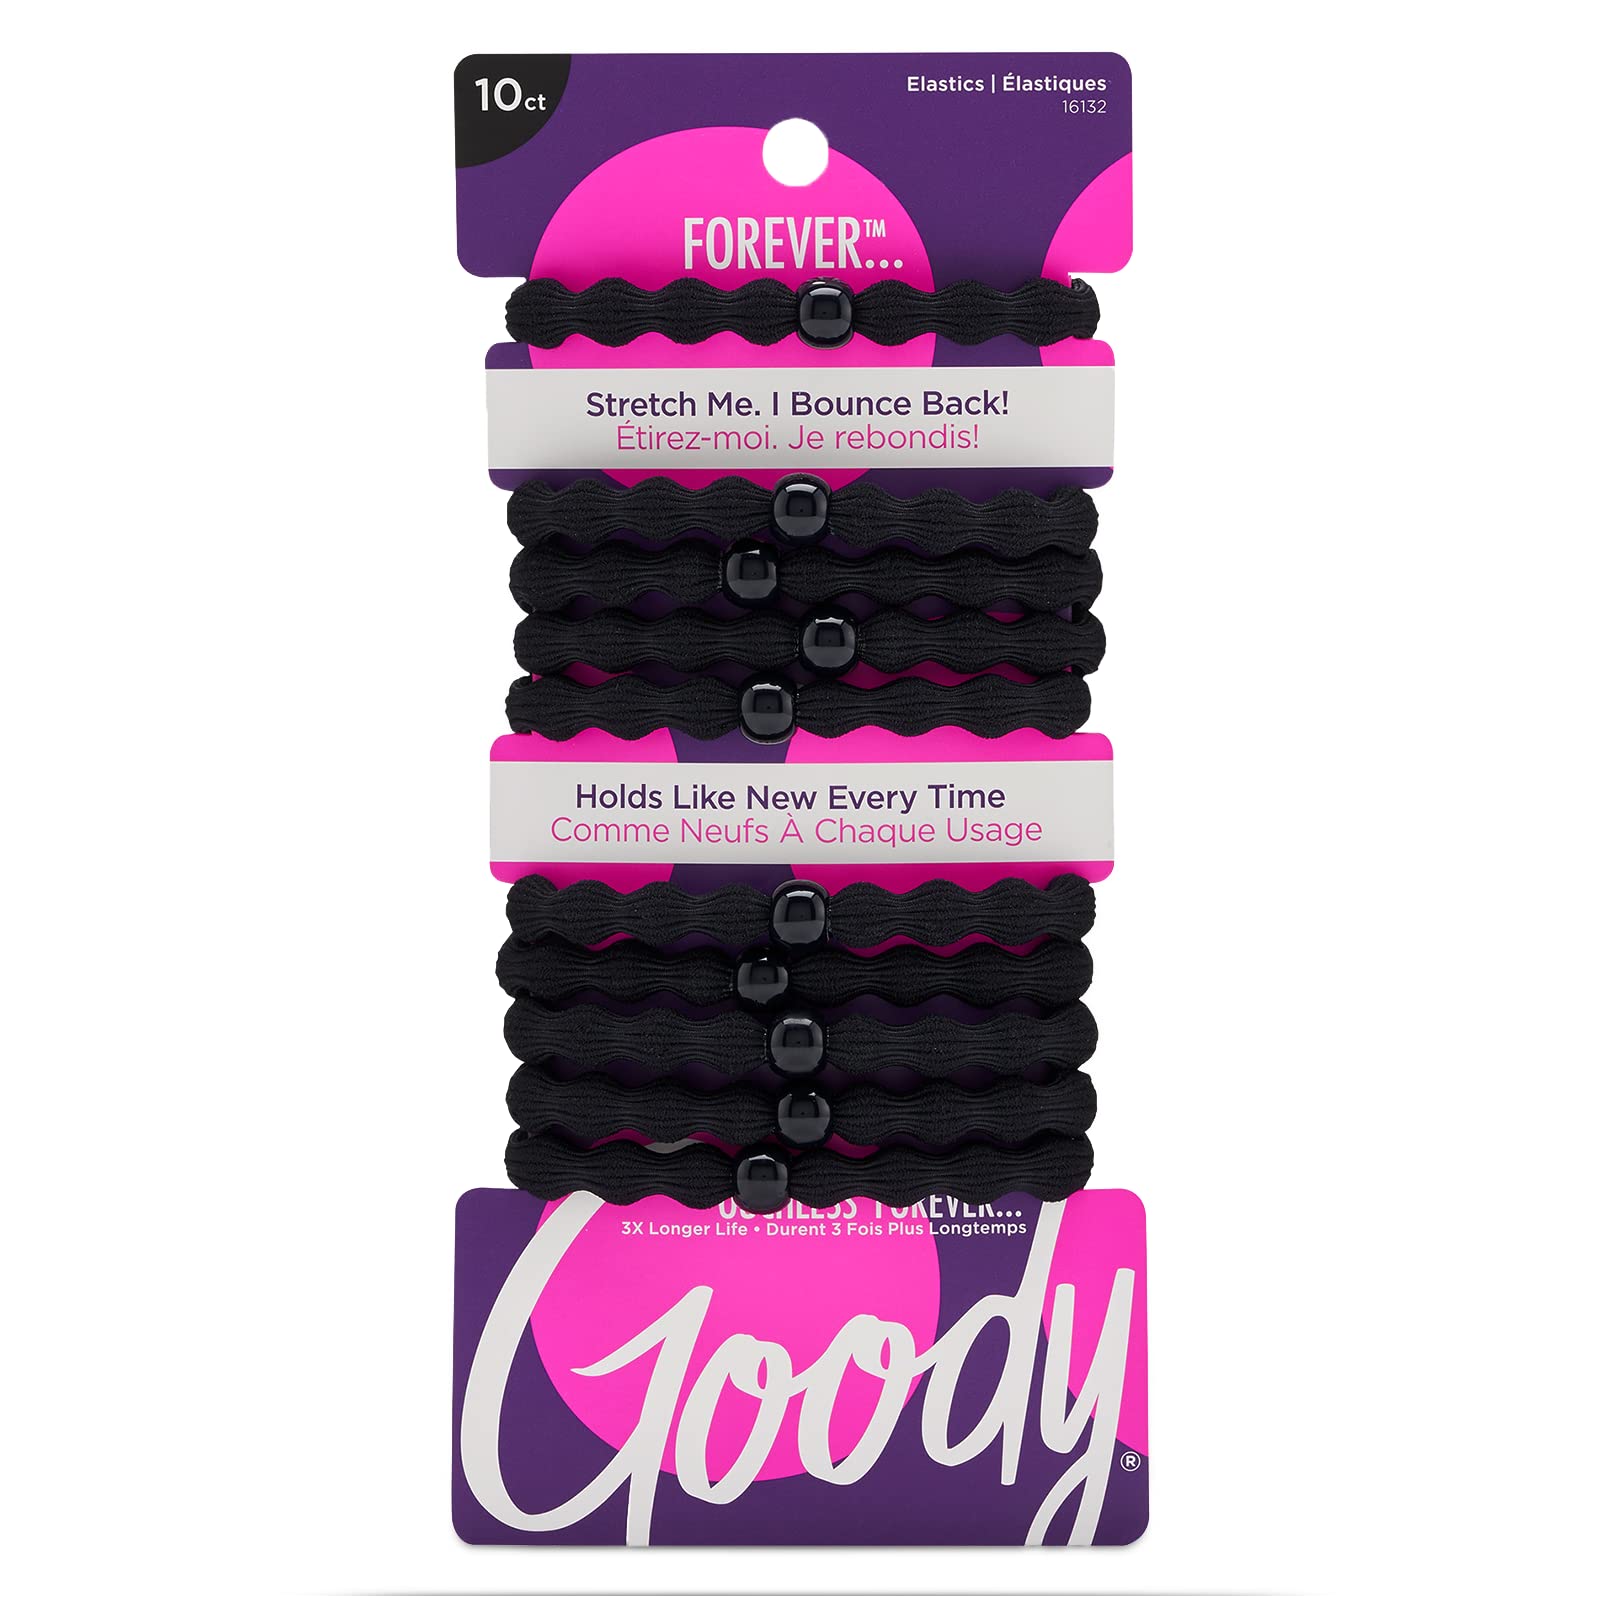 Goody Forever Ouchless Elastic Hair Tie - 10 Count, Black - Medium Hair to Thick Hair - Accessories for Women and Girls